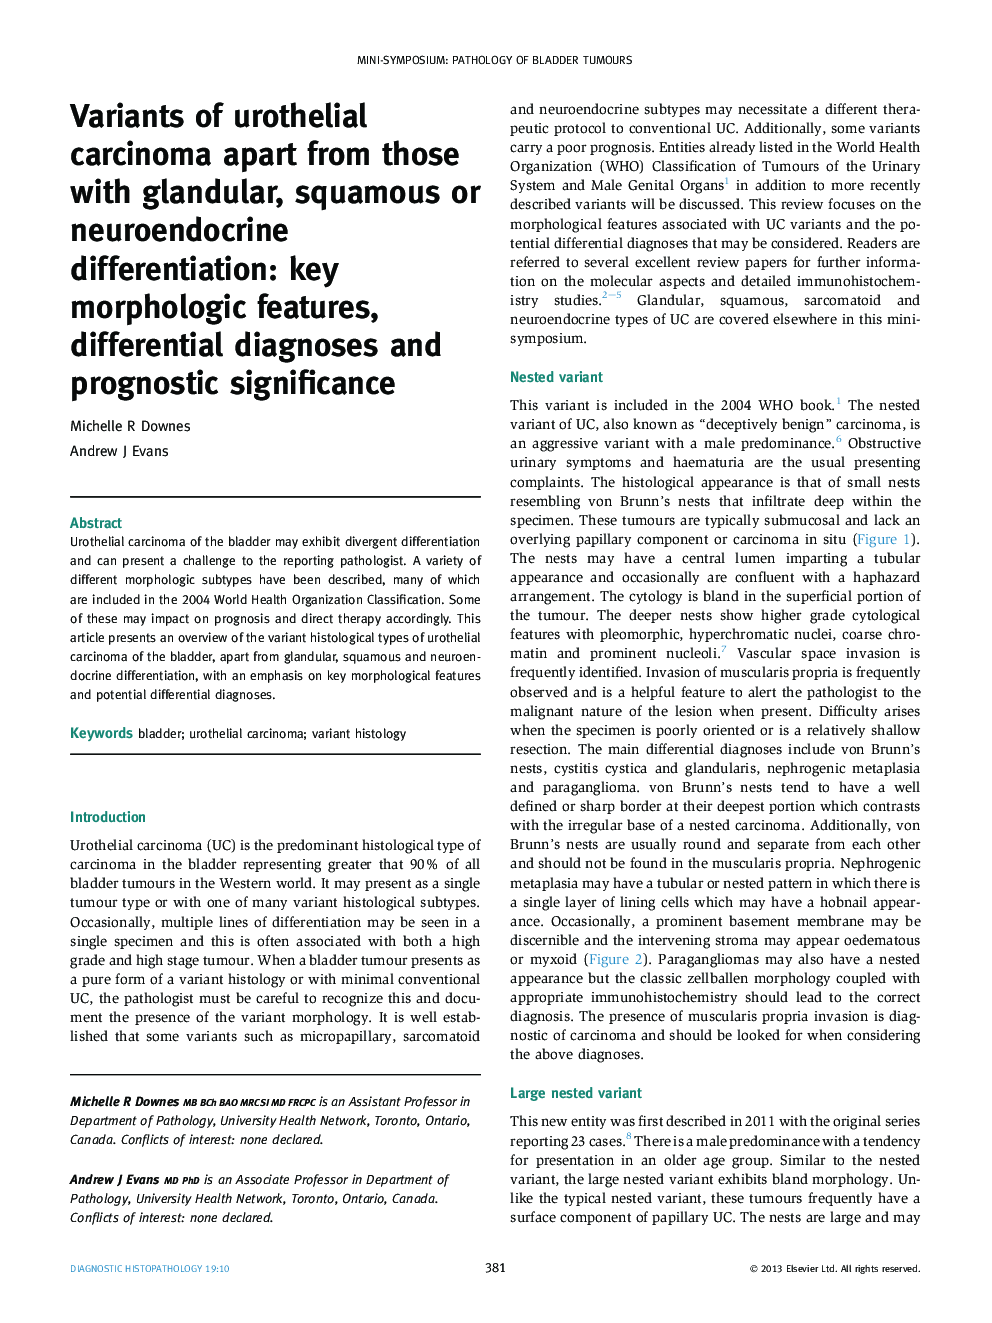 Variants of urothelial carcinoma apart from those with glandular, squamous or neuroendocrine differentiation: key morphologic features, differential diagnoses and prognostic significance